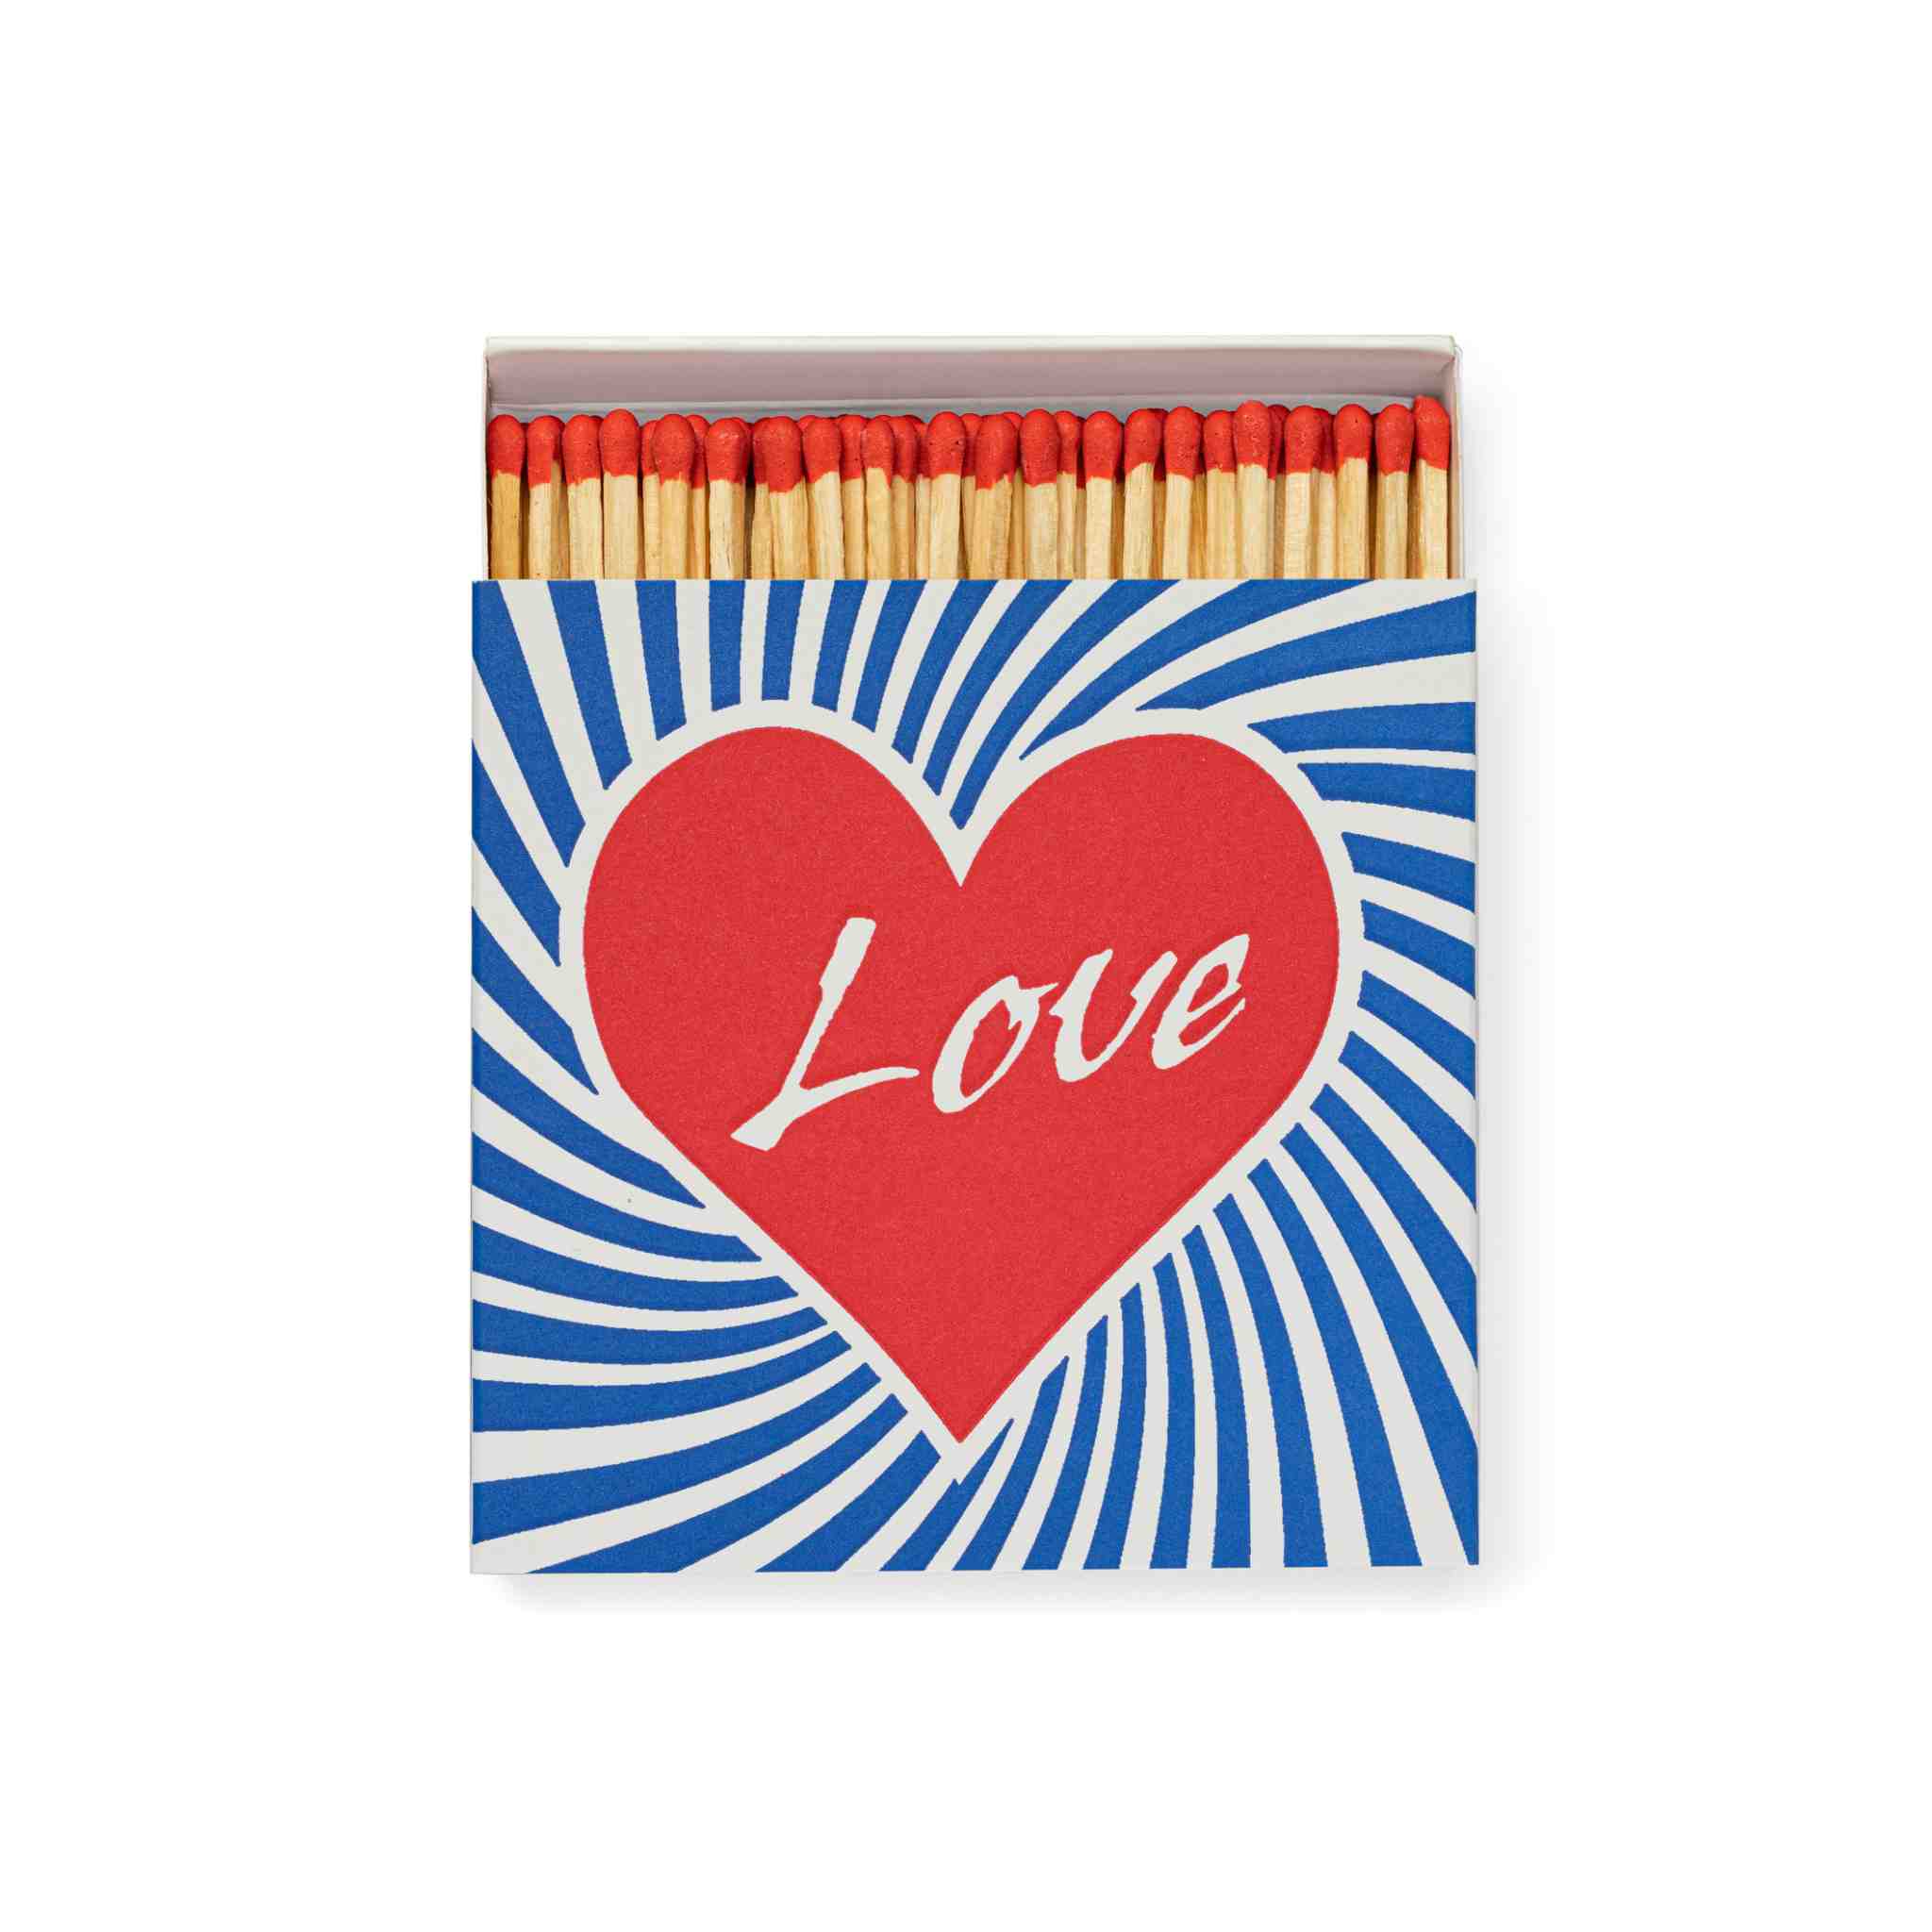 Love, Box of Matches